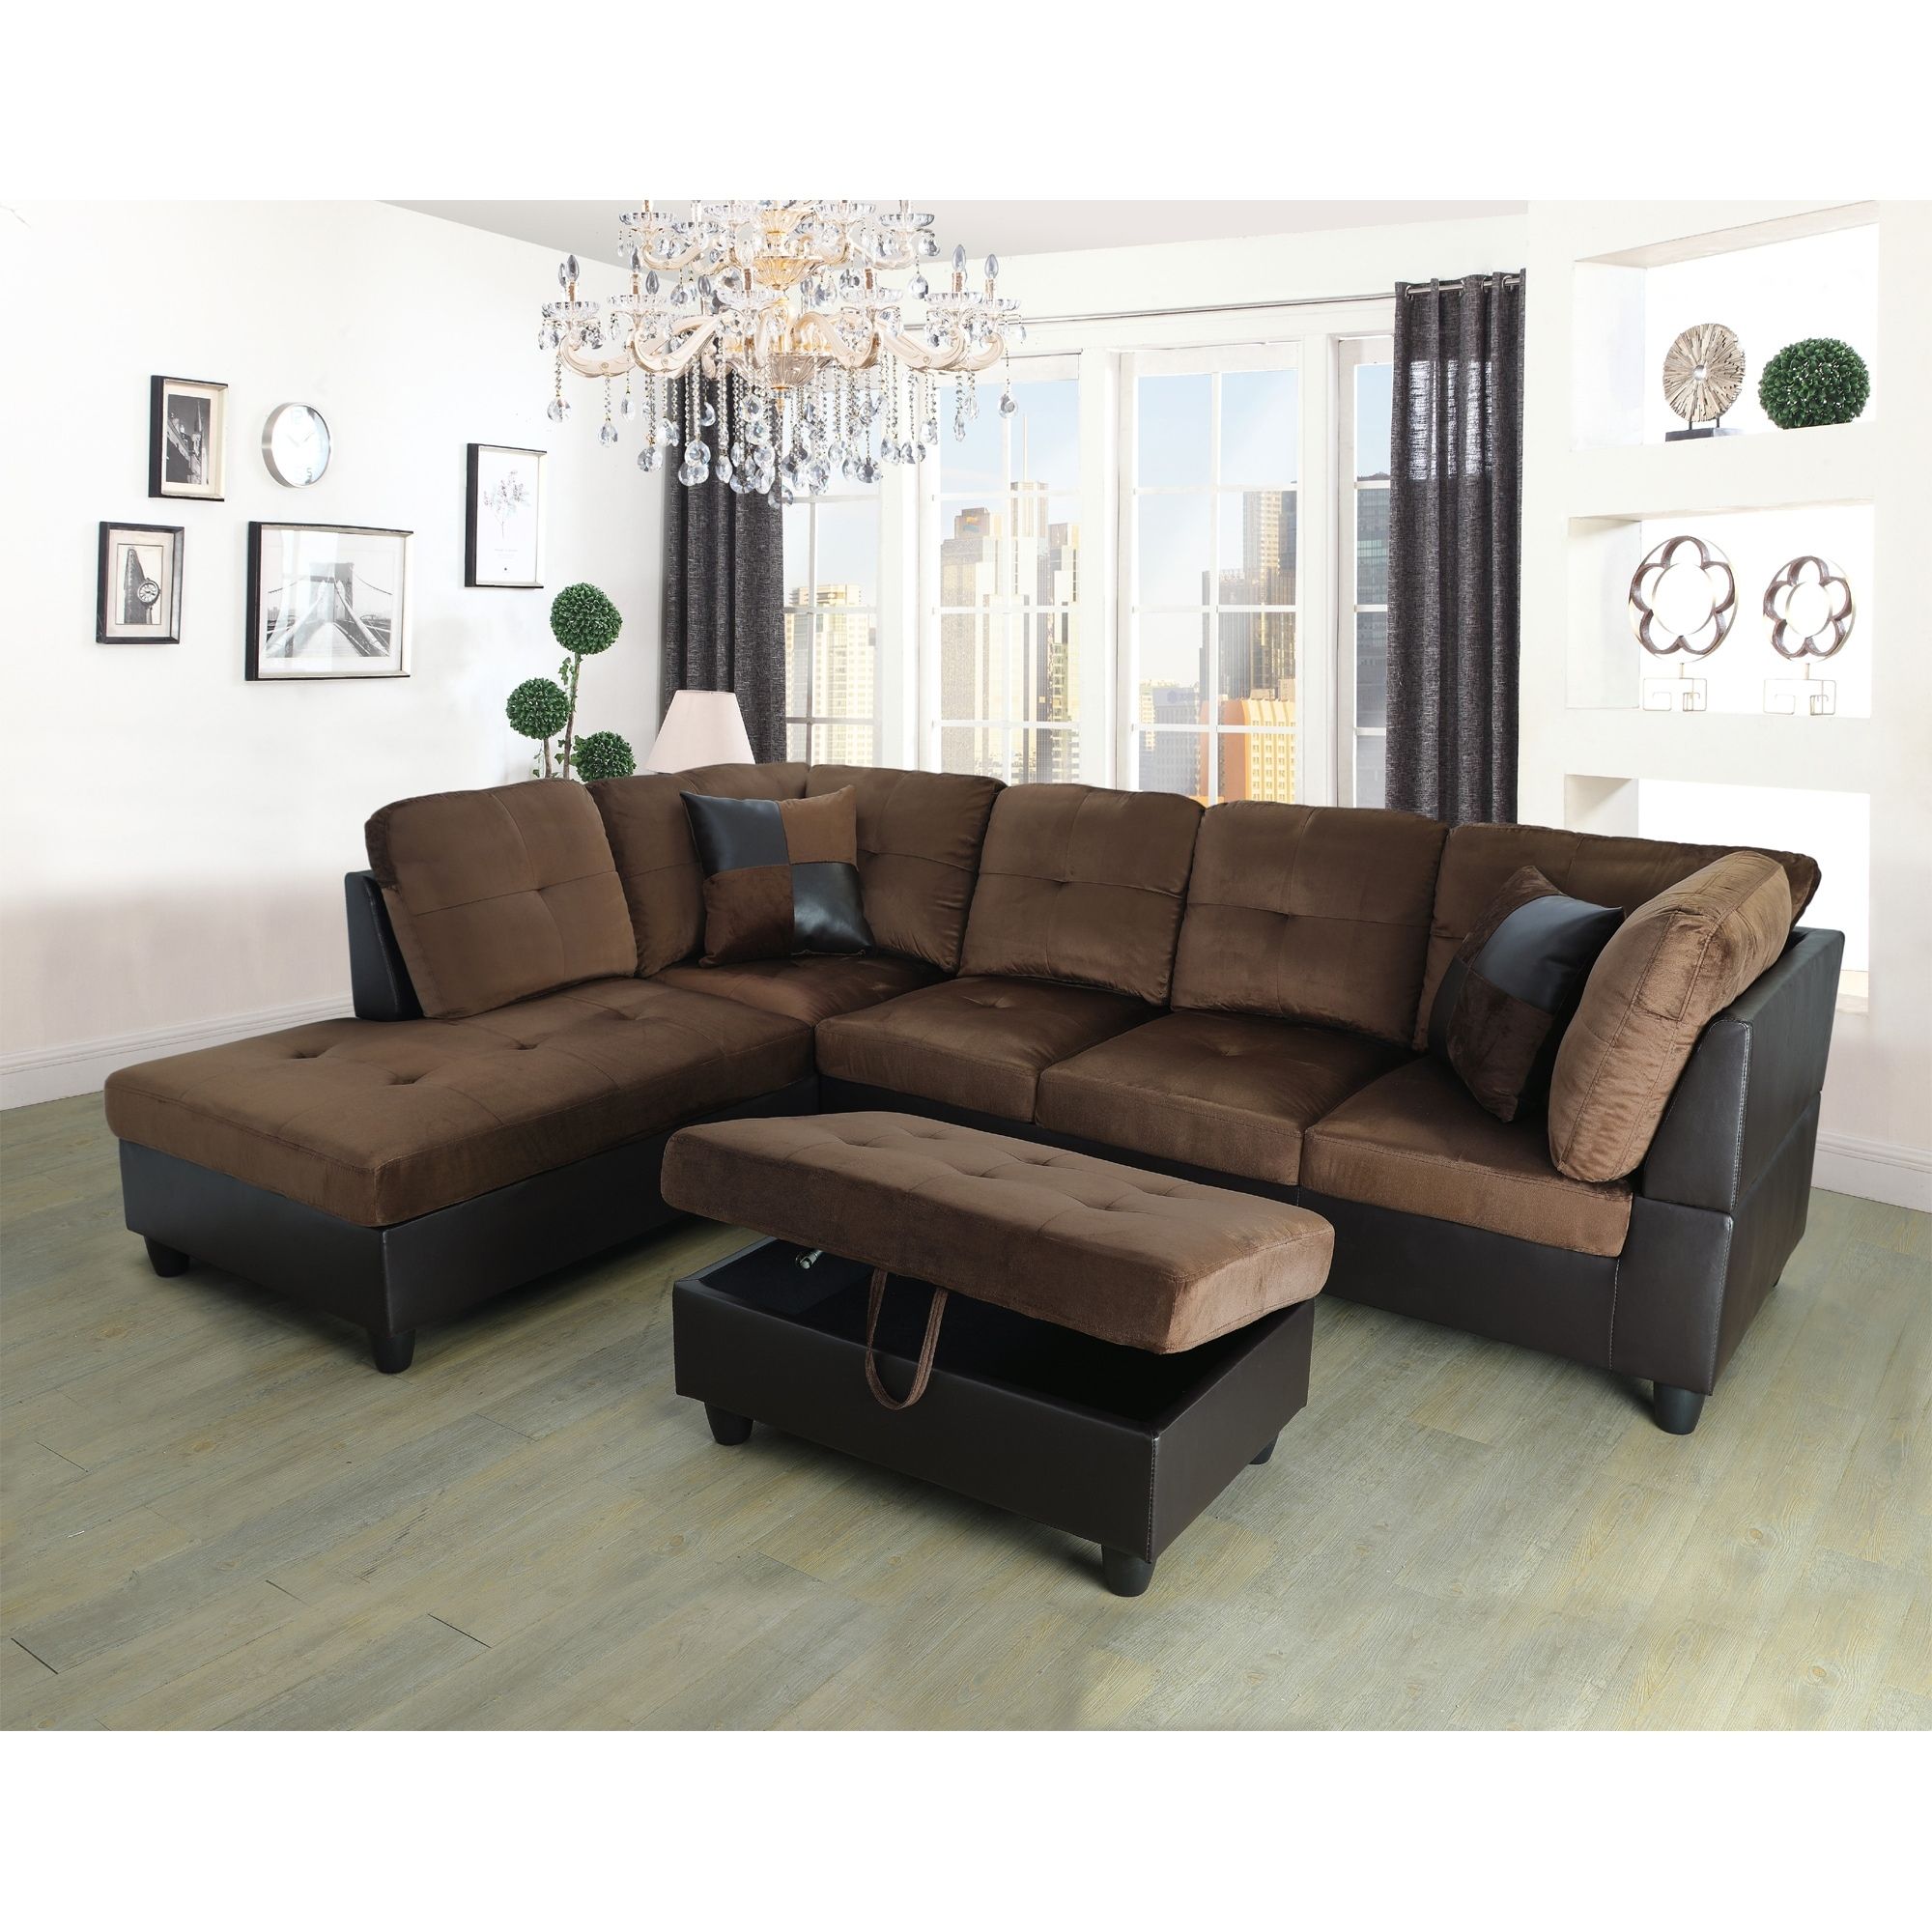 3 Pieces Sectional Sofa Set,Left Facing,Chocolate Microfiber(107A) – On  Sale – Bed Bath & Beyond – 33609340 For 2 Tone Chocolate Microfiber Sofas (Photo 13 of 15)